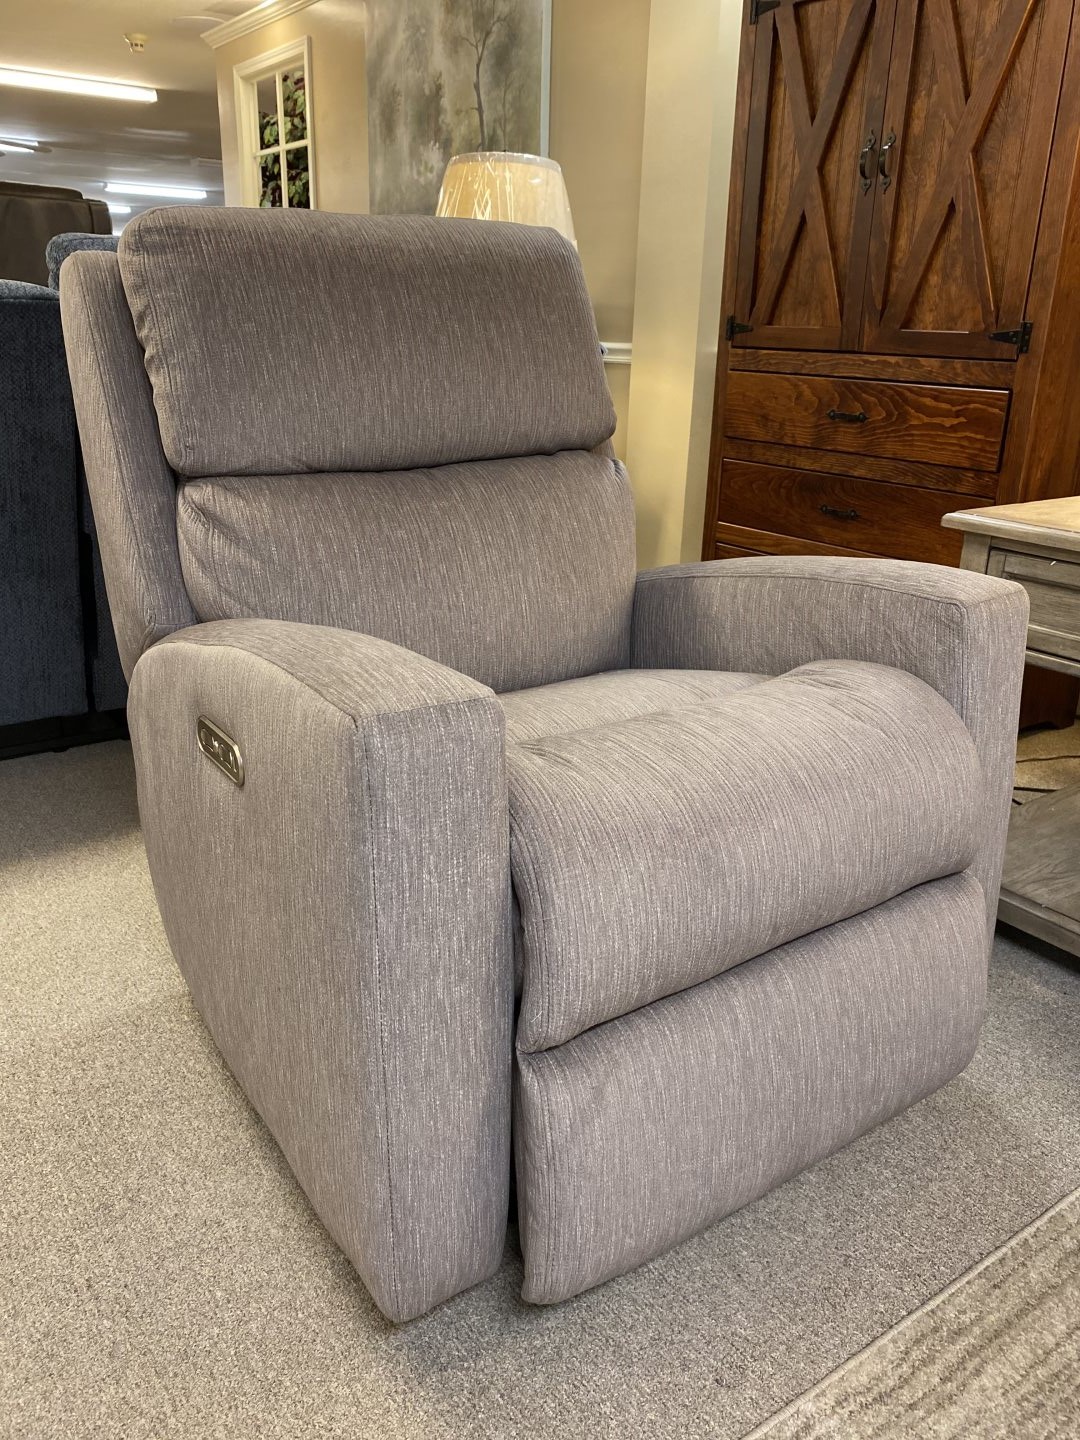 Upholstered Recliners